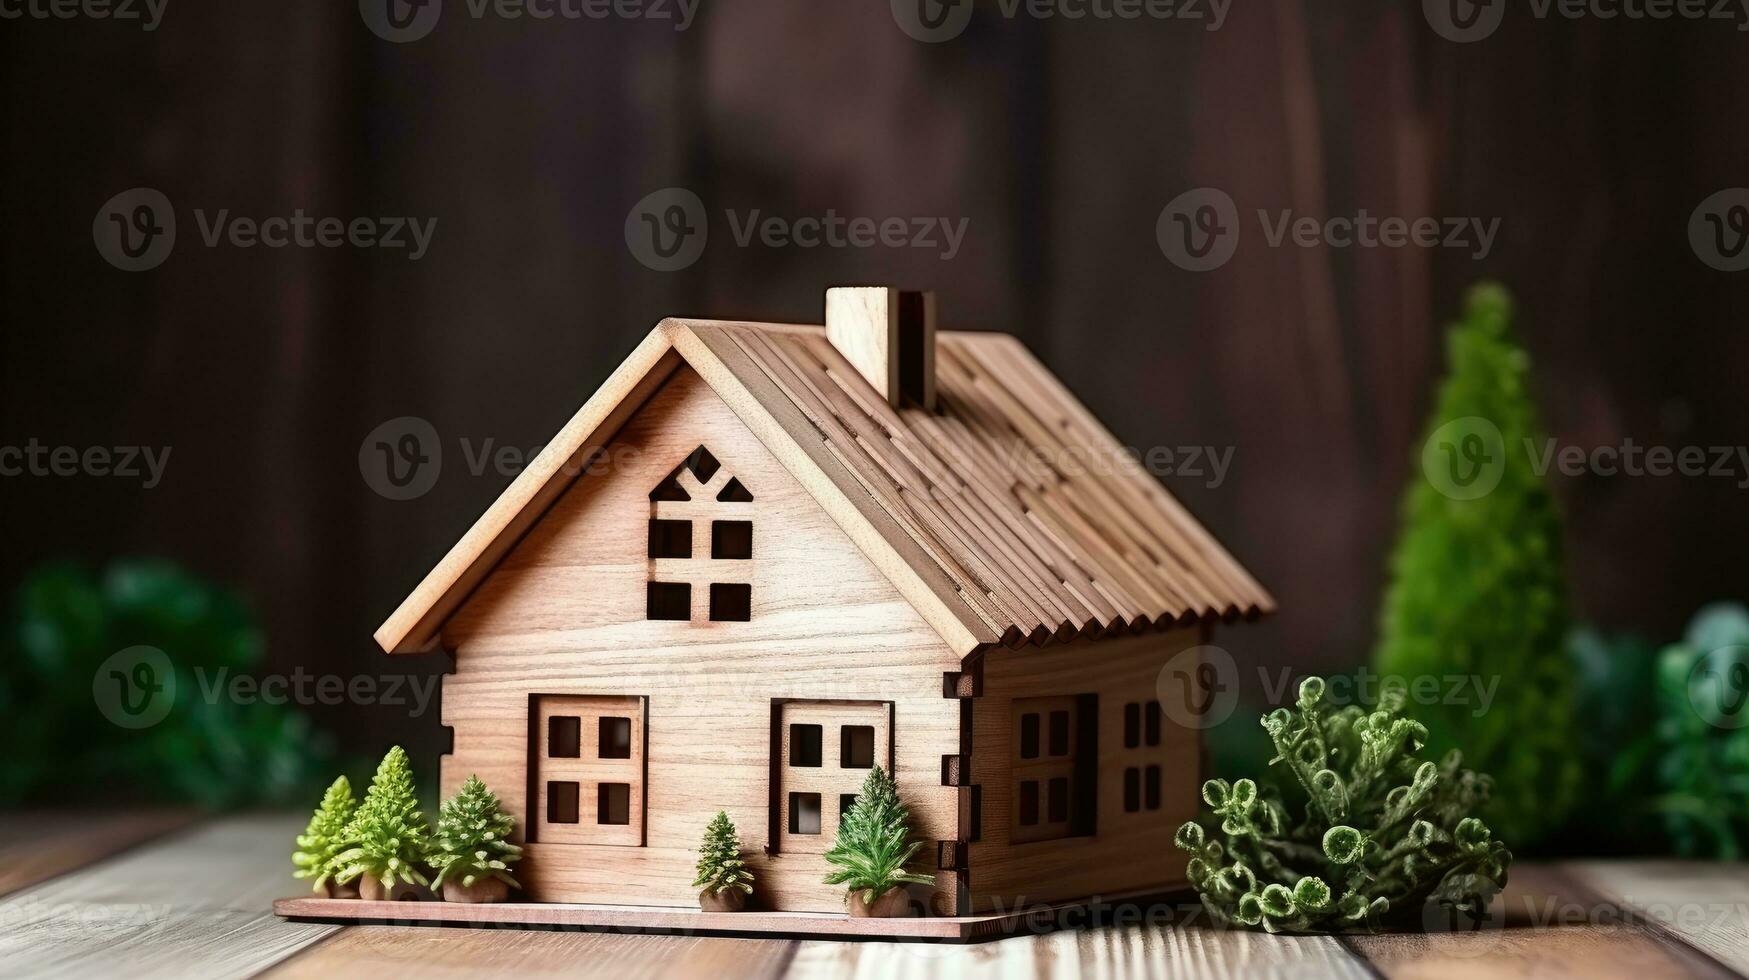 a wooden house in table, real estate concept photo